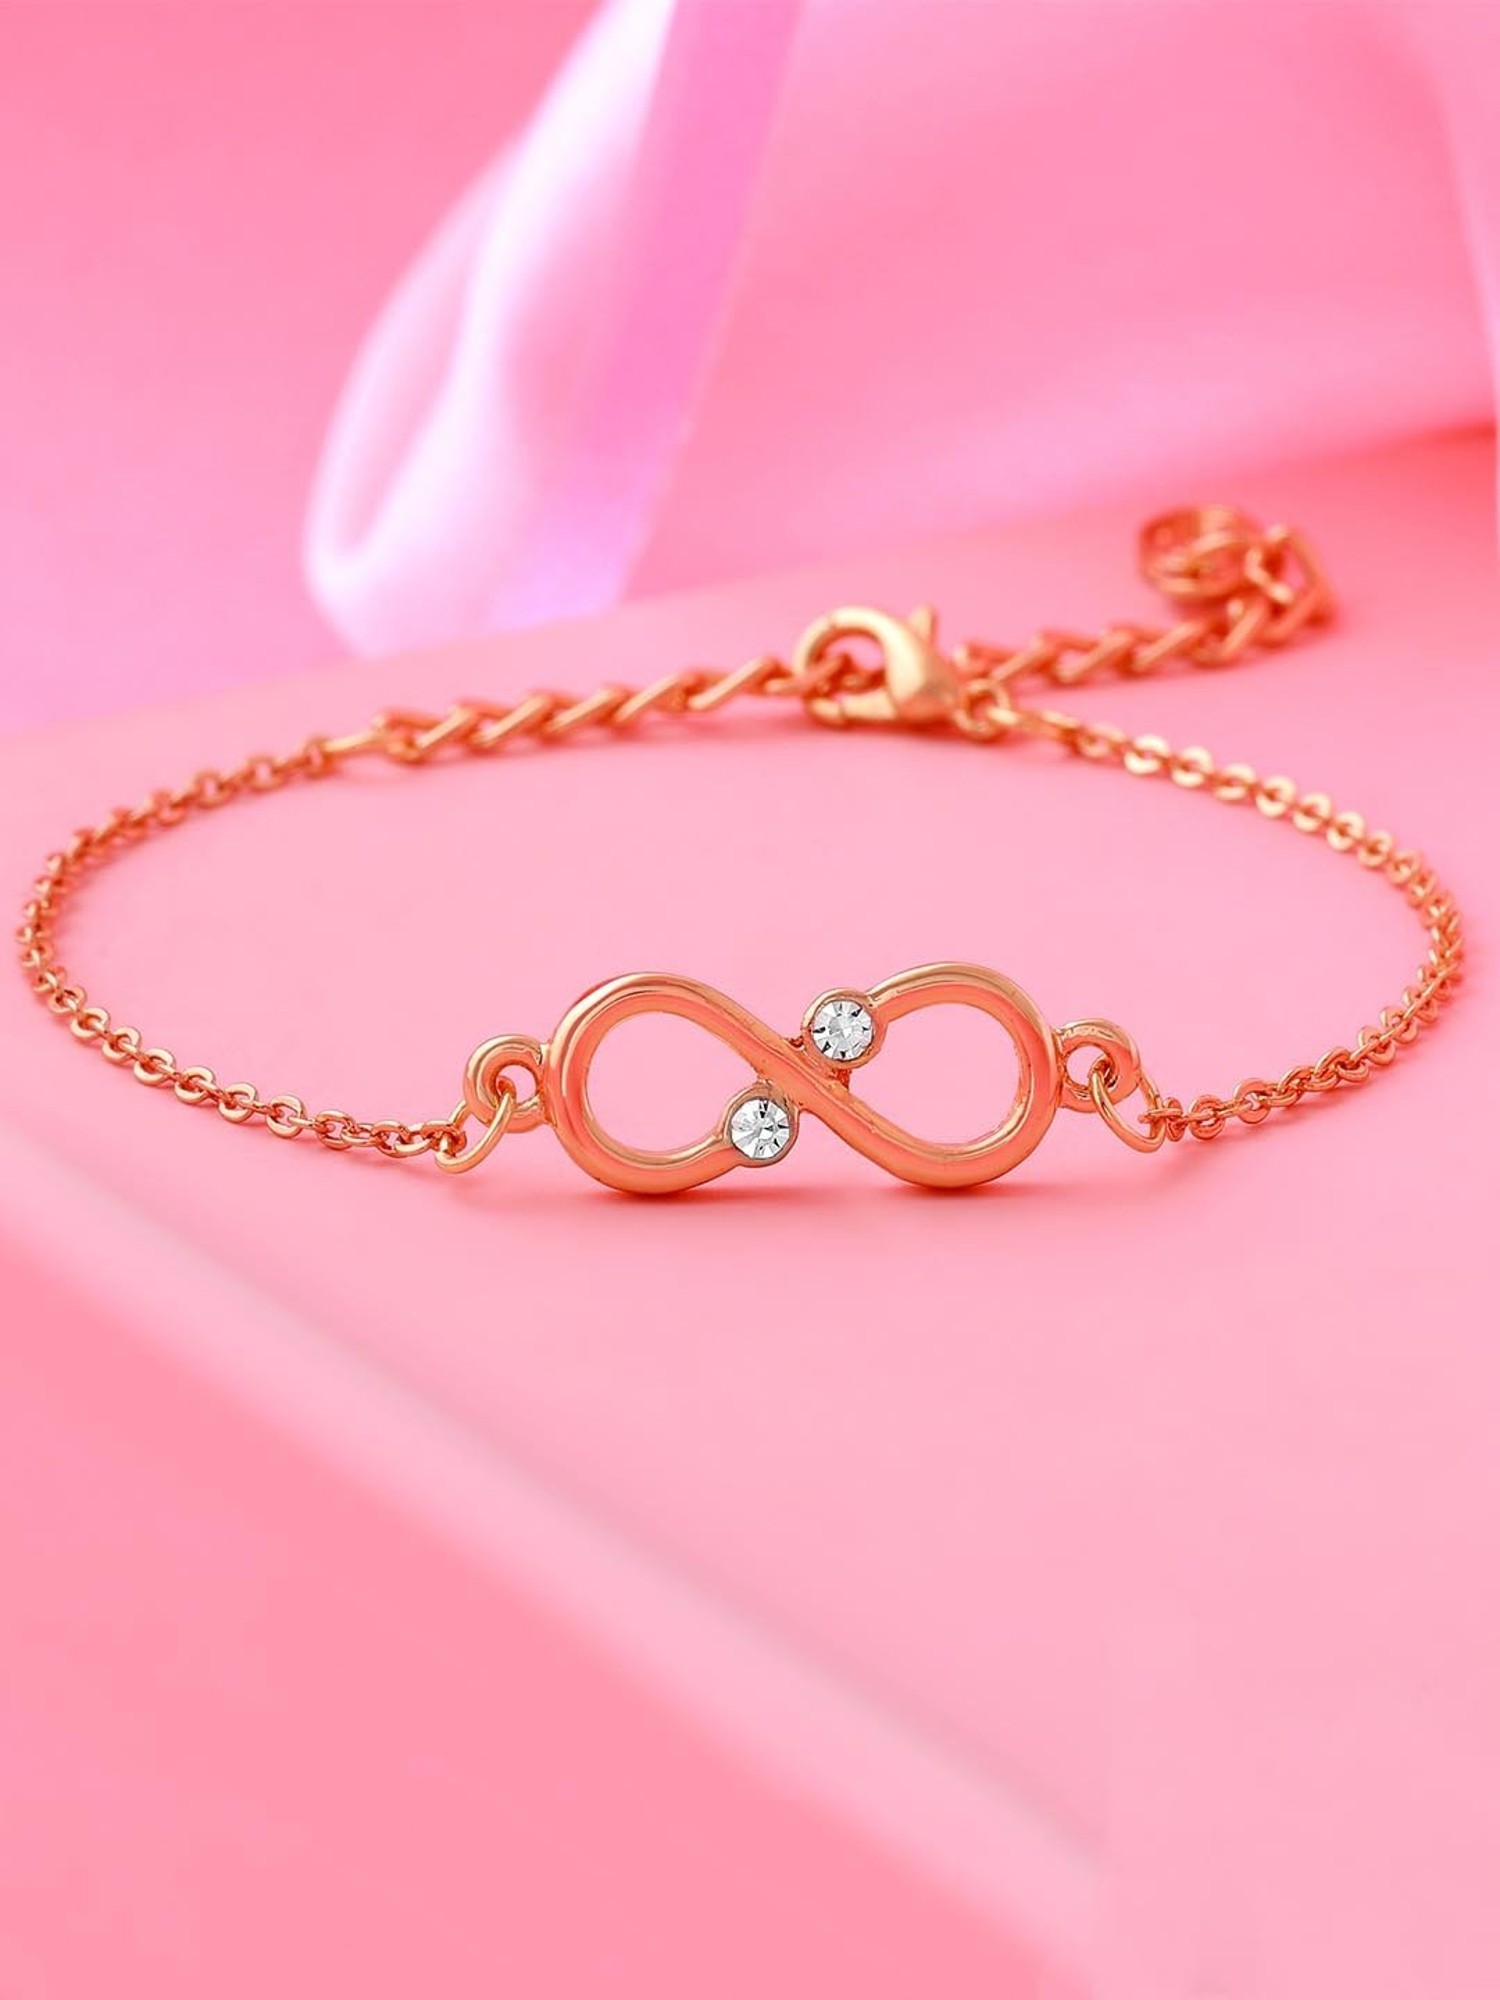 Buy KIAAN ENTERPRISE Infinity Symbol Charm Rose Gold Plated Bracelet with  Cubic Diamonds,Gift for Anniversary, Birthday, Friendship at Amazon.in